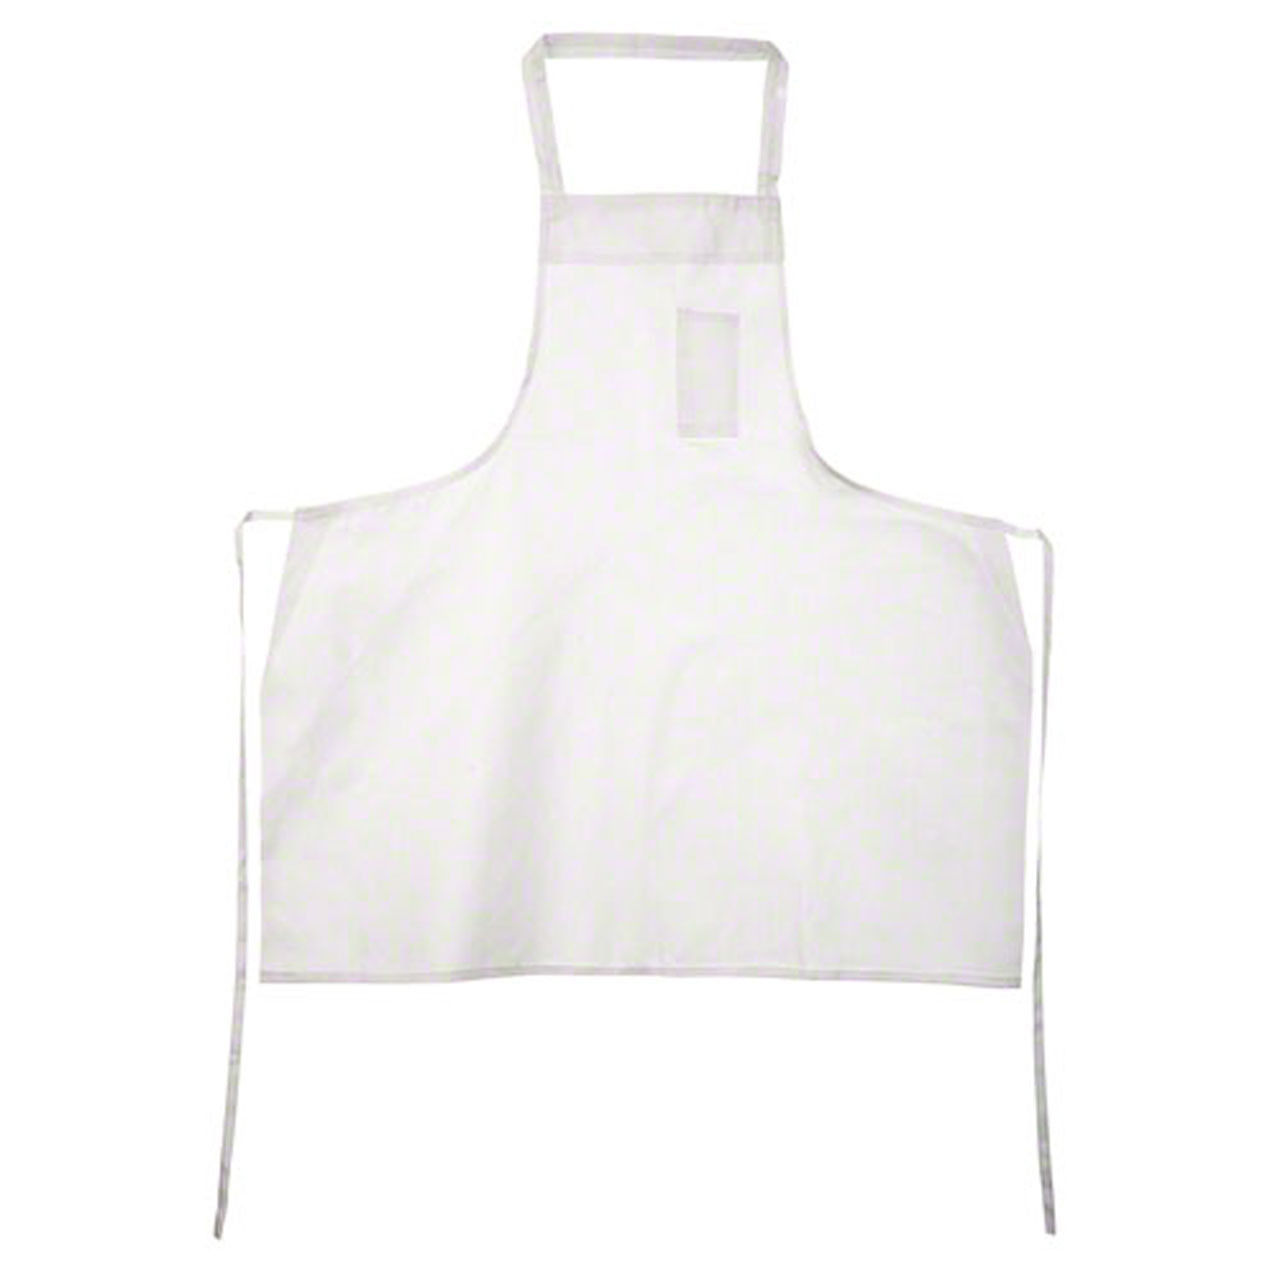 What's the pricing strategy for these cheap white aprons, specifically the White Economy Bib Aprons, Twill Weave, 65/35?